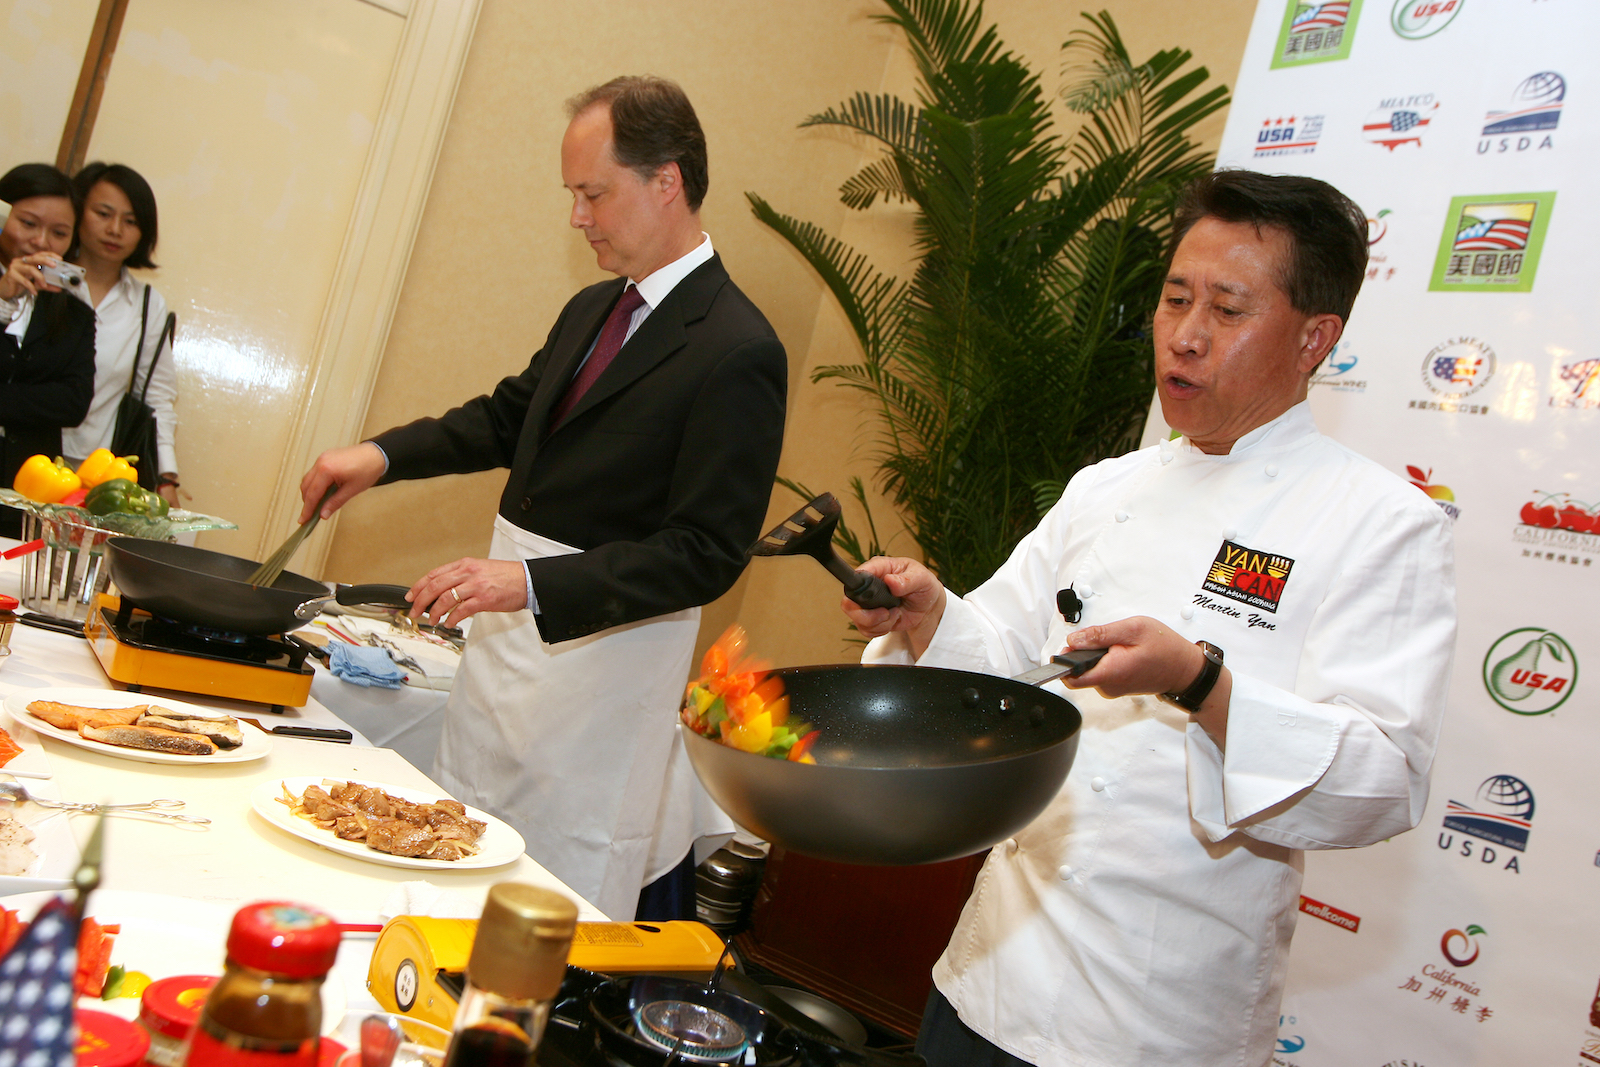 Two men cook over hot stoves. The man on the right wears a white chef uniform and holds a wok with flame